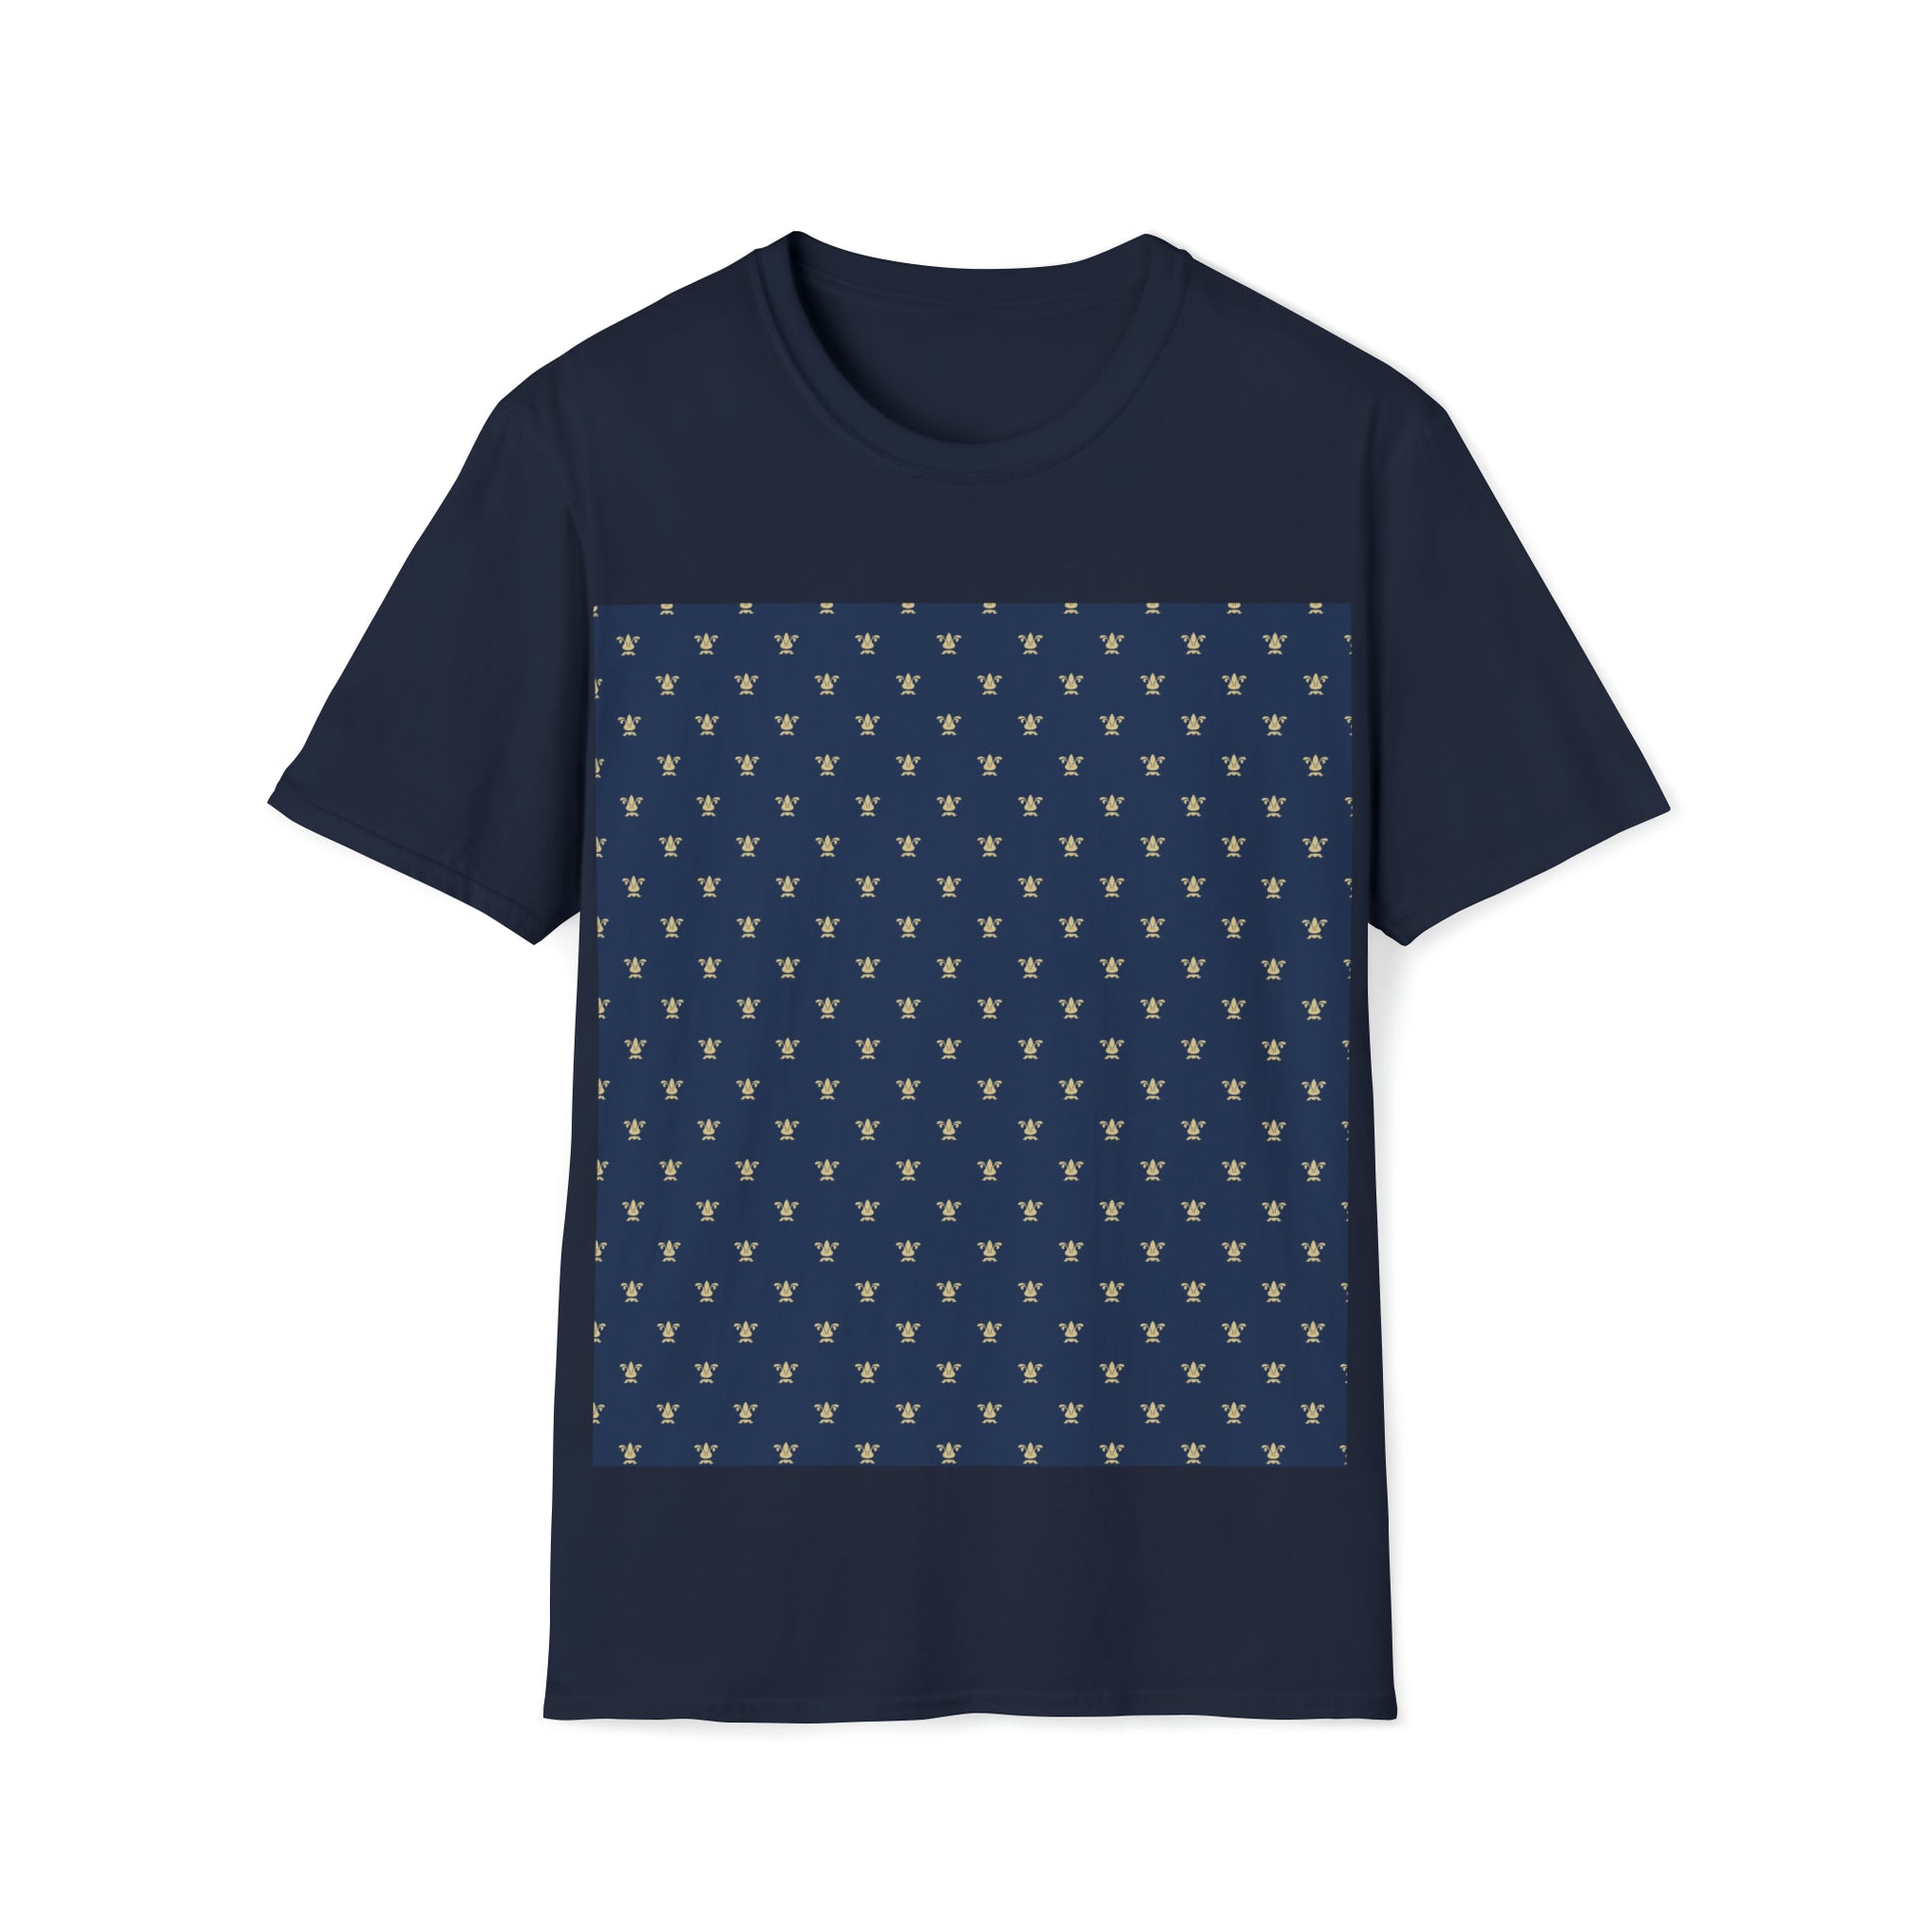 Navy with gold crested icon tee